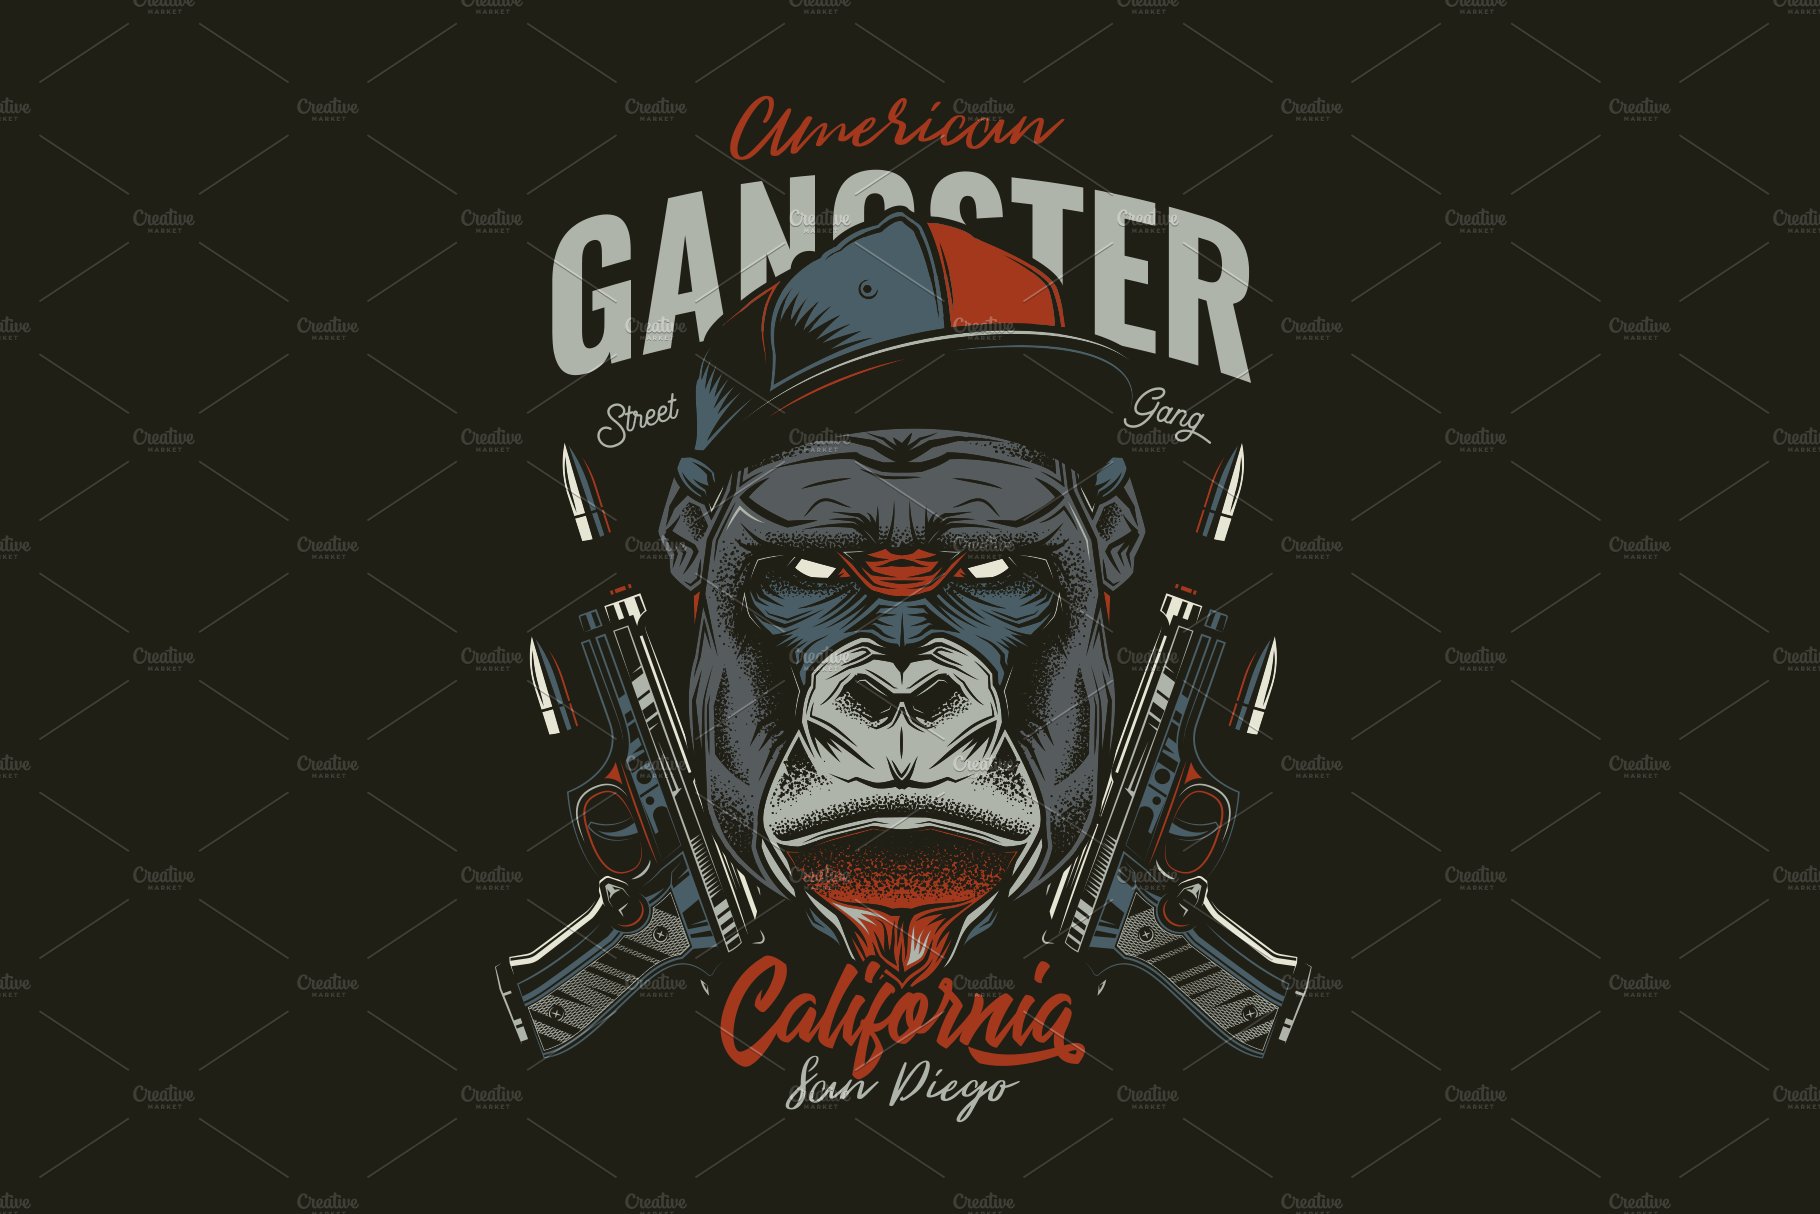 GORILLA GANGSTER preview image.